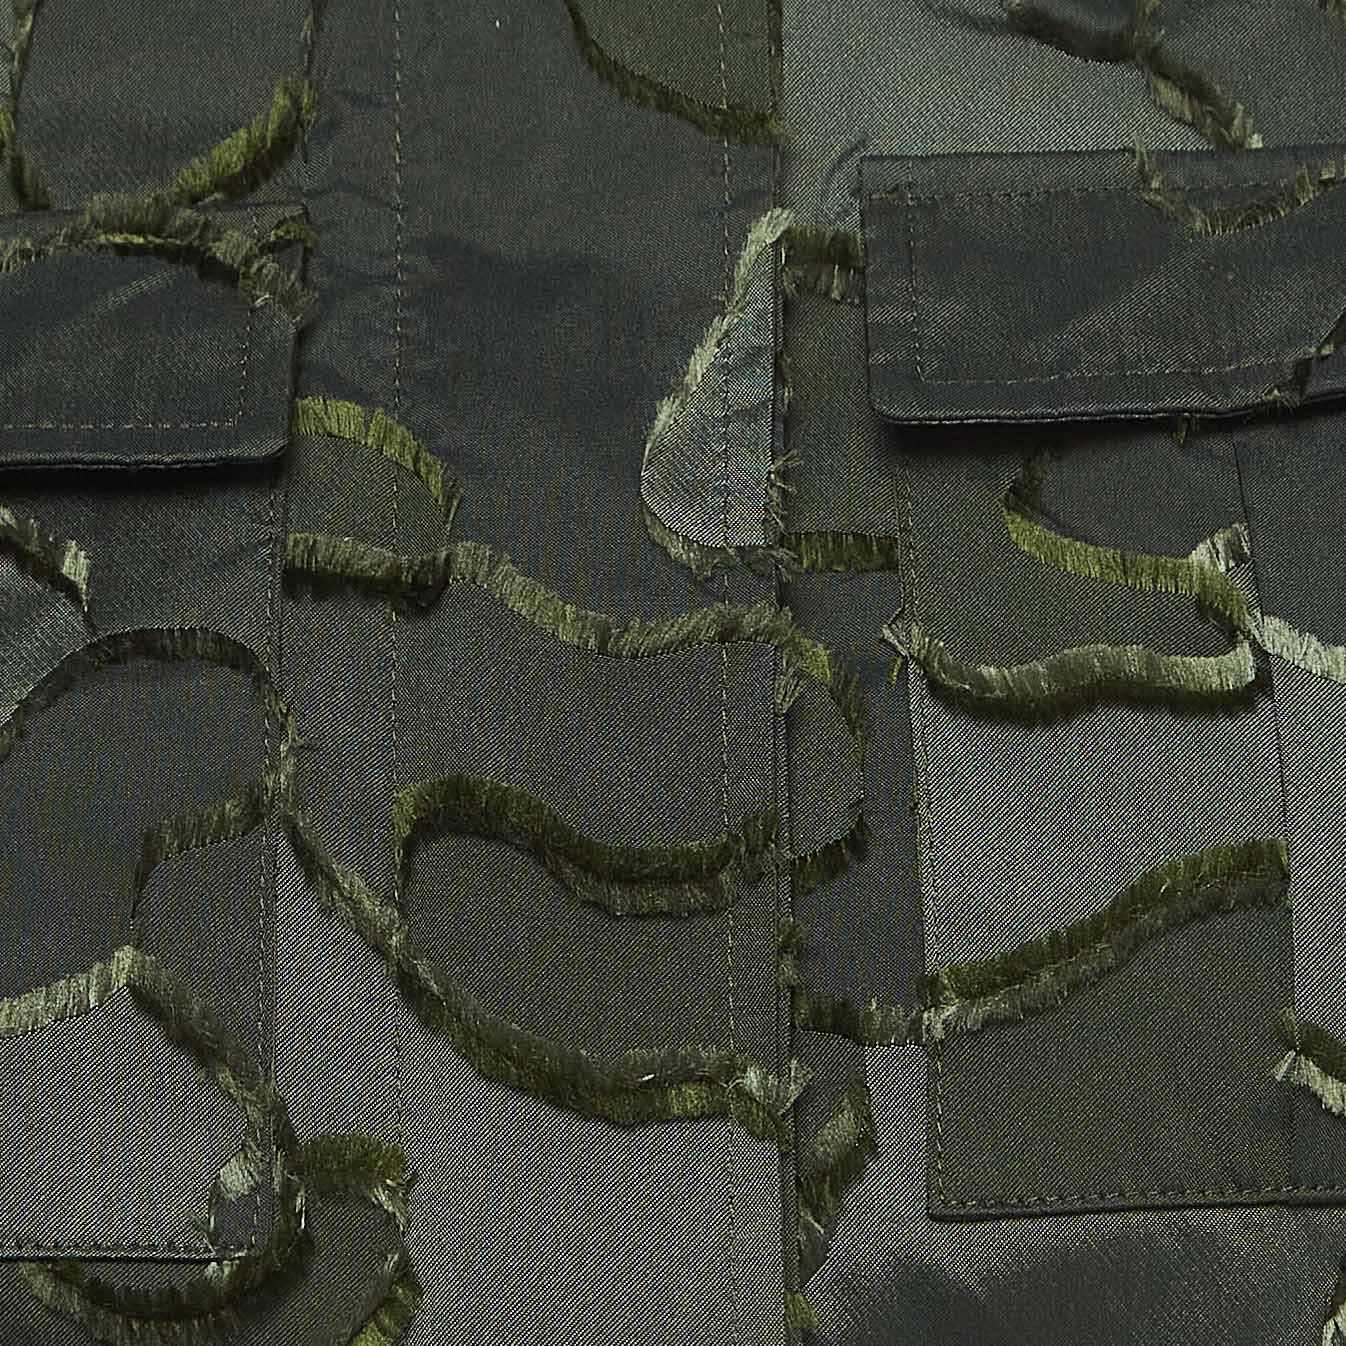 Christian Dior Military Green Camouflage Synthetic Zip Front Jacket S